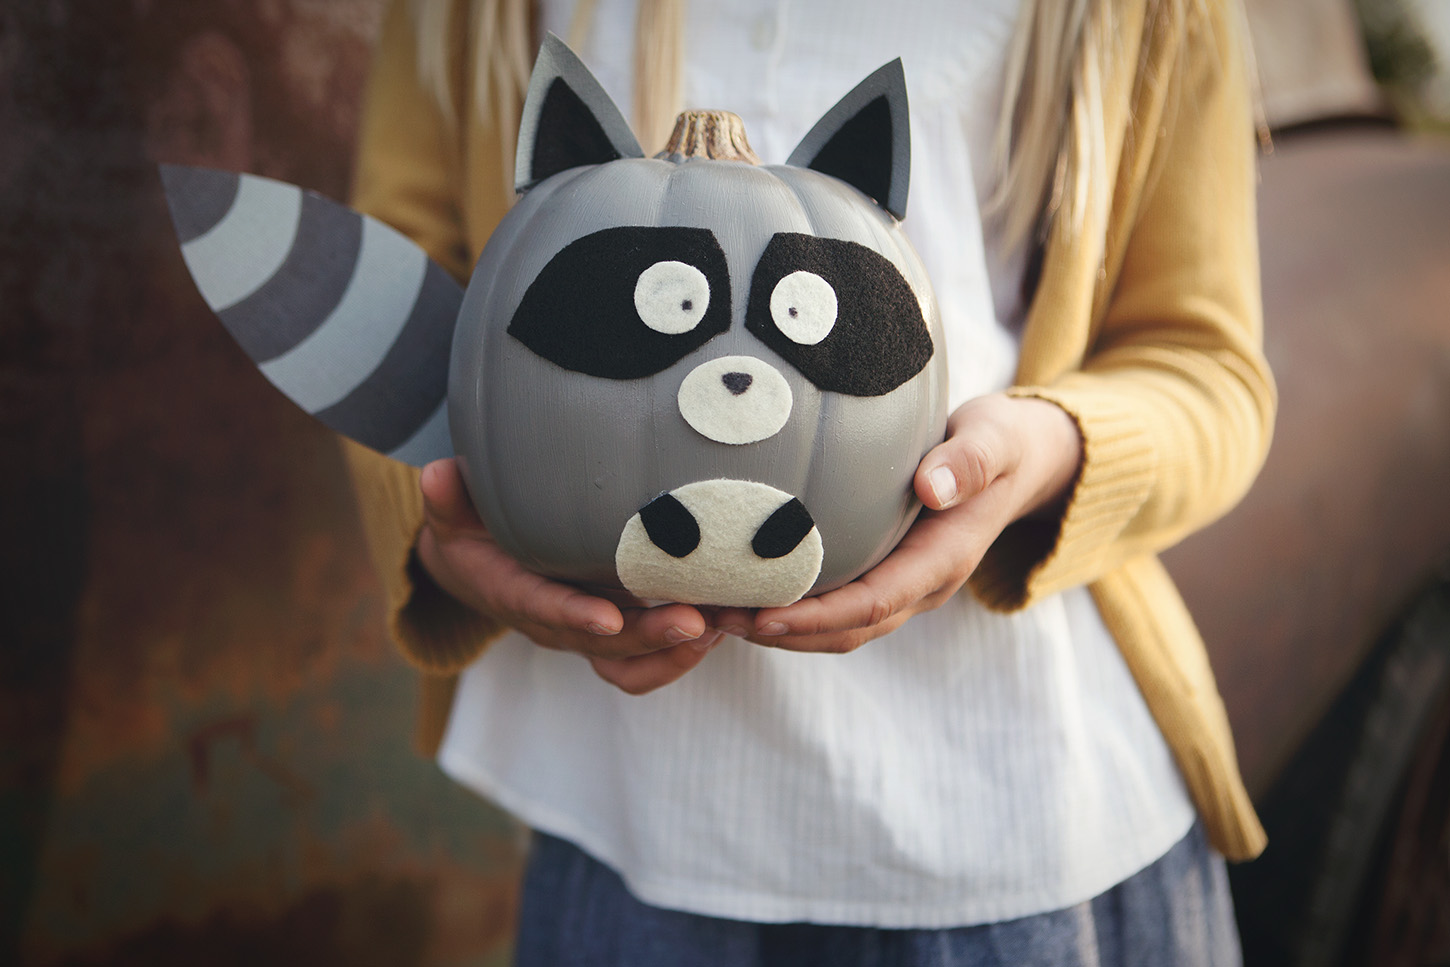 These Woodland Creature No-Carve Pumpkins are the perfect way to dress up your pumpkins this fall. If you love pumpkins, but loathe carving them, this is the project for you!